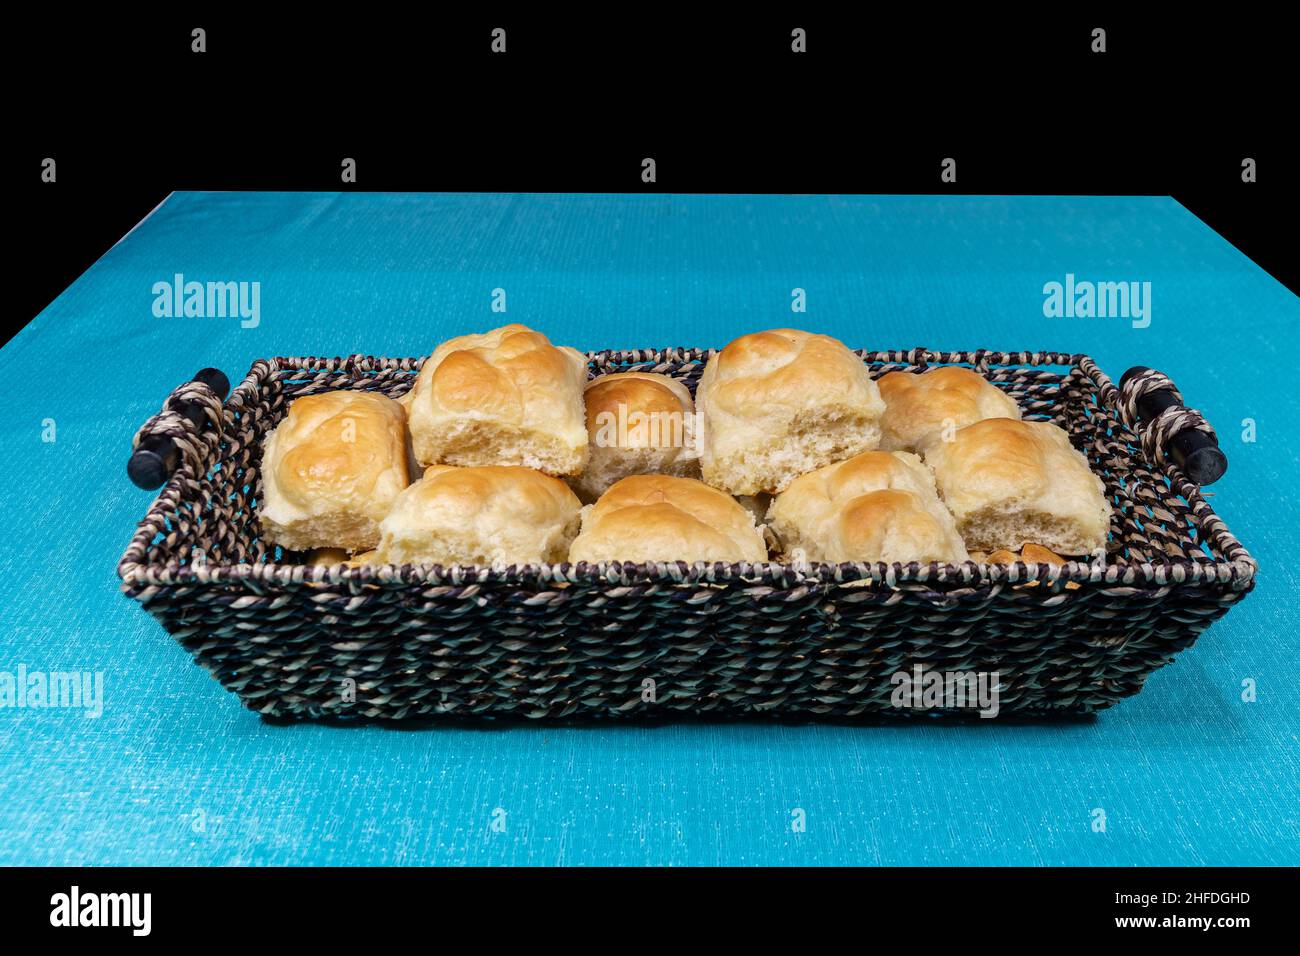 A basket of fresh baked, home cooked dinner rolls with fluffy texture and golden brown crust in a wicker basket on a table waiting to be served. Stock Photo